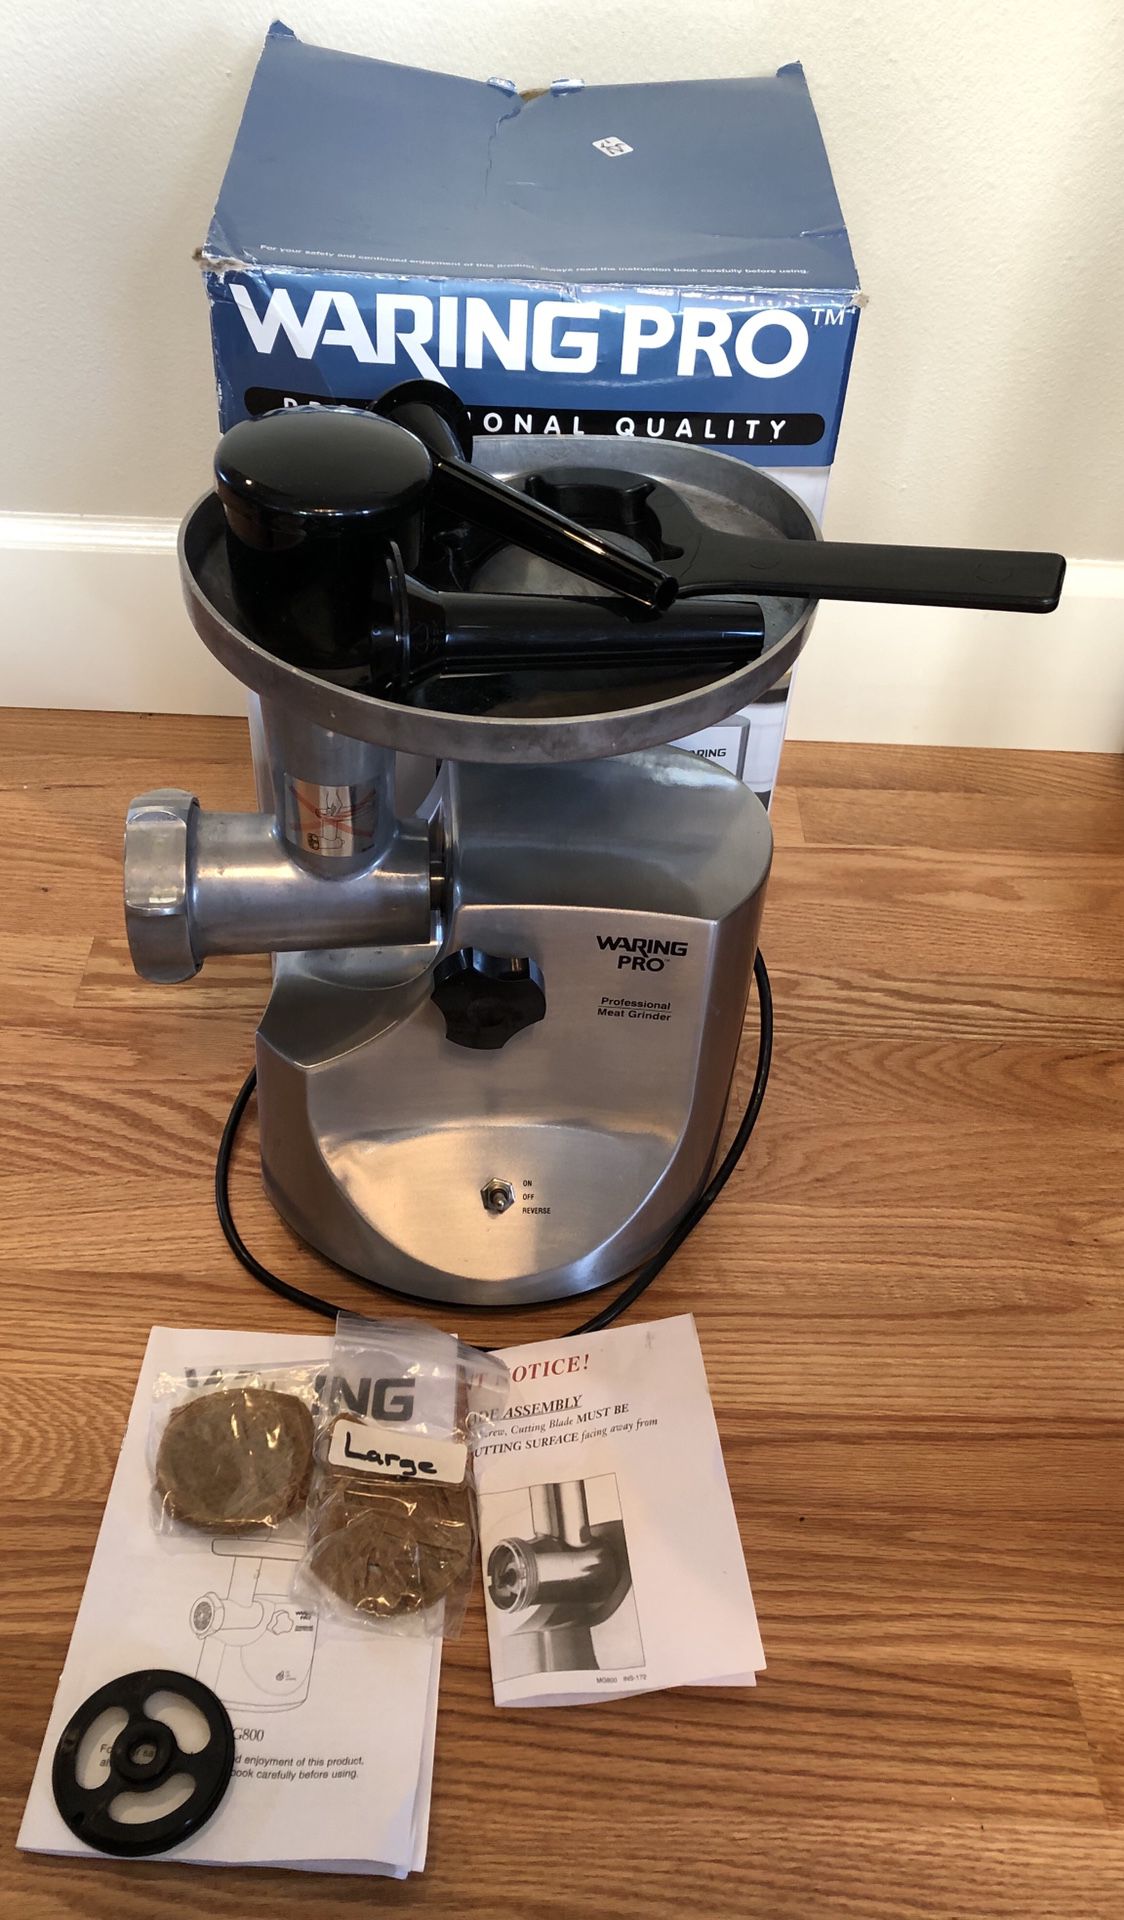 Waring Pro Professional Meat Grinder MG800